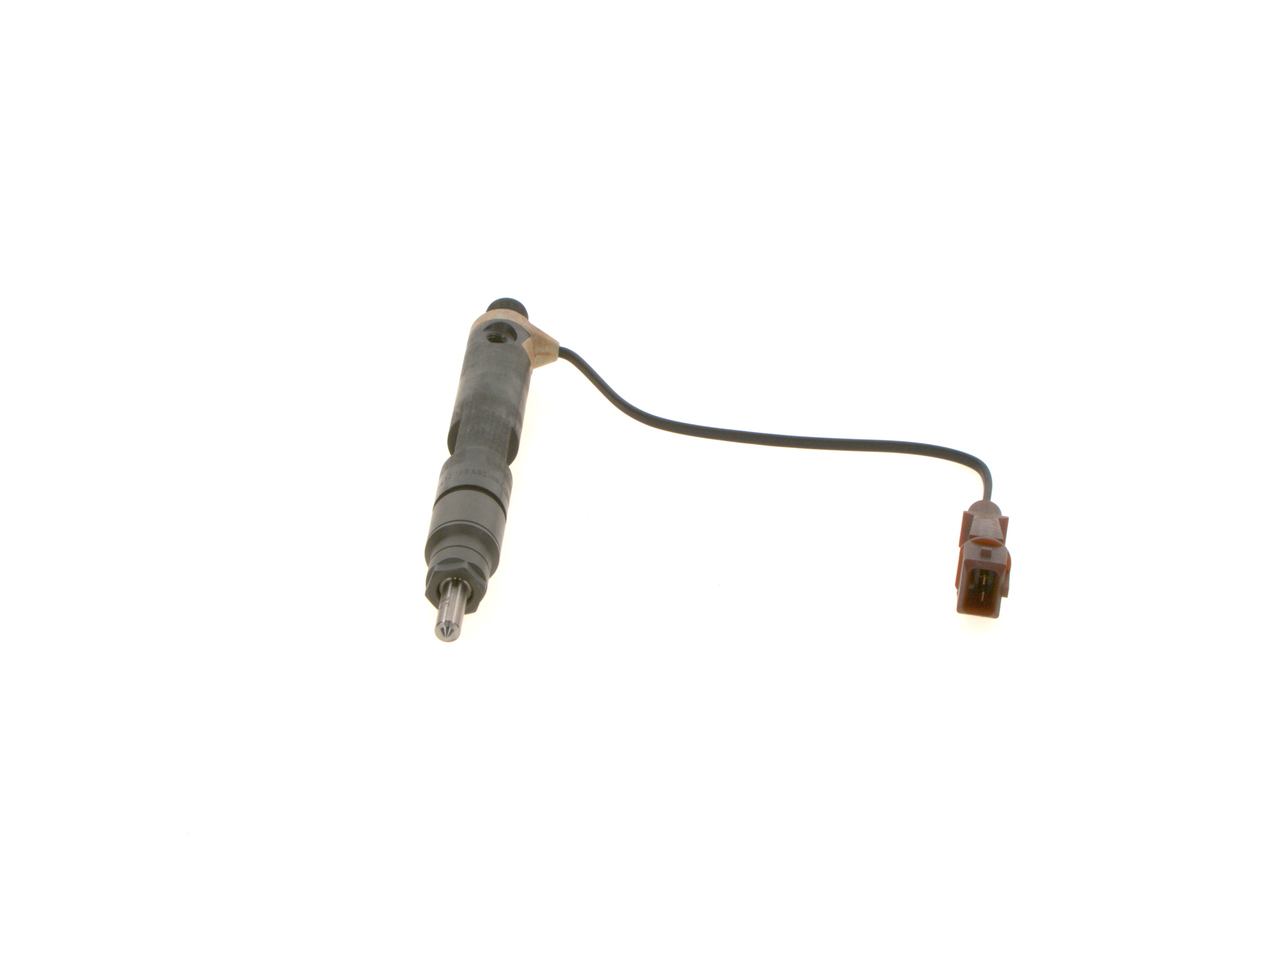 BOSCH 0 432 193 680 Nozzle and Holder Assembly